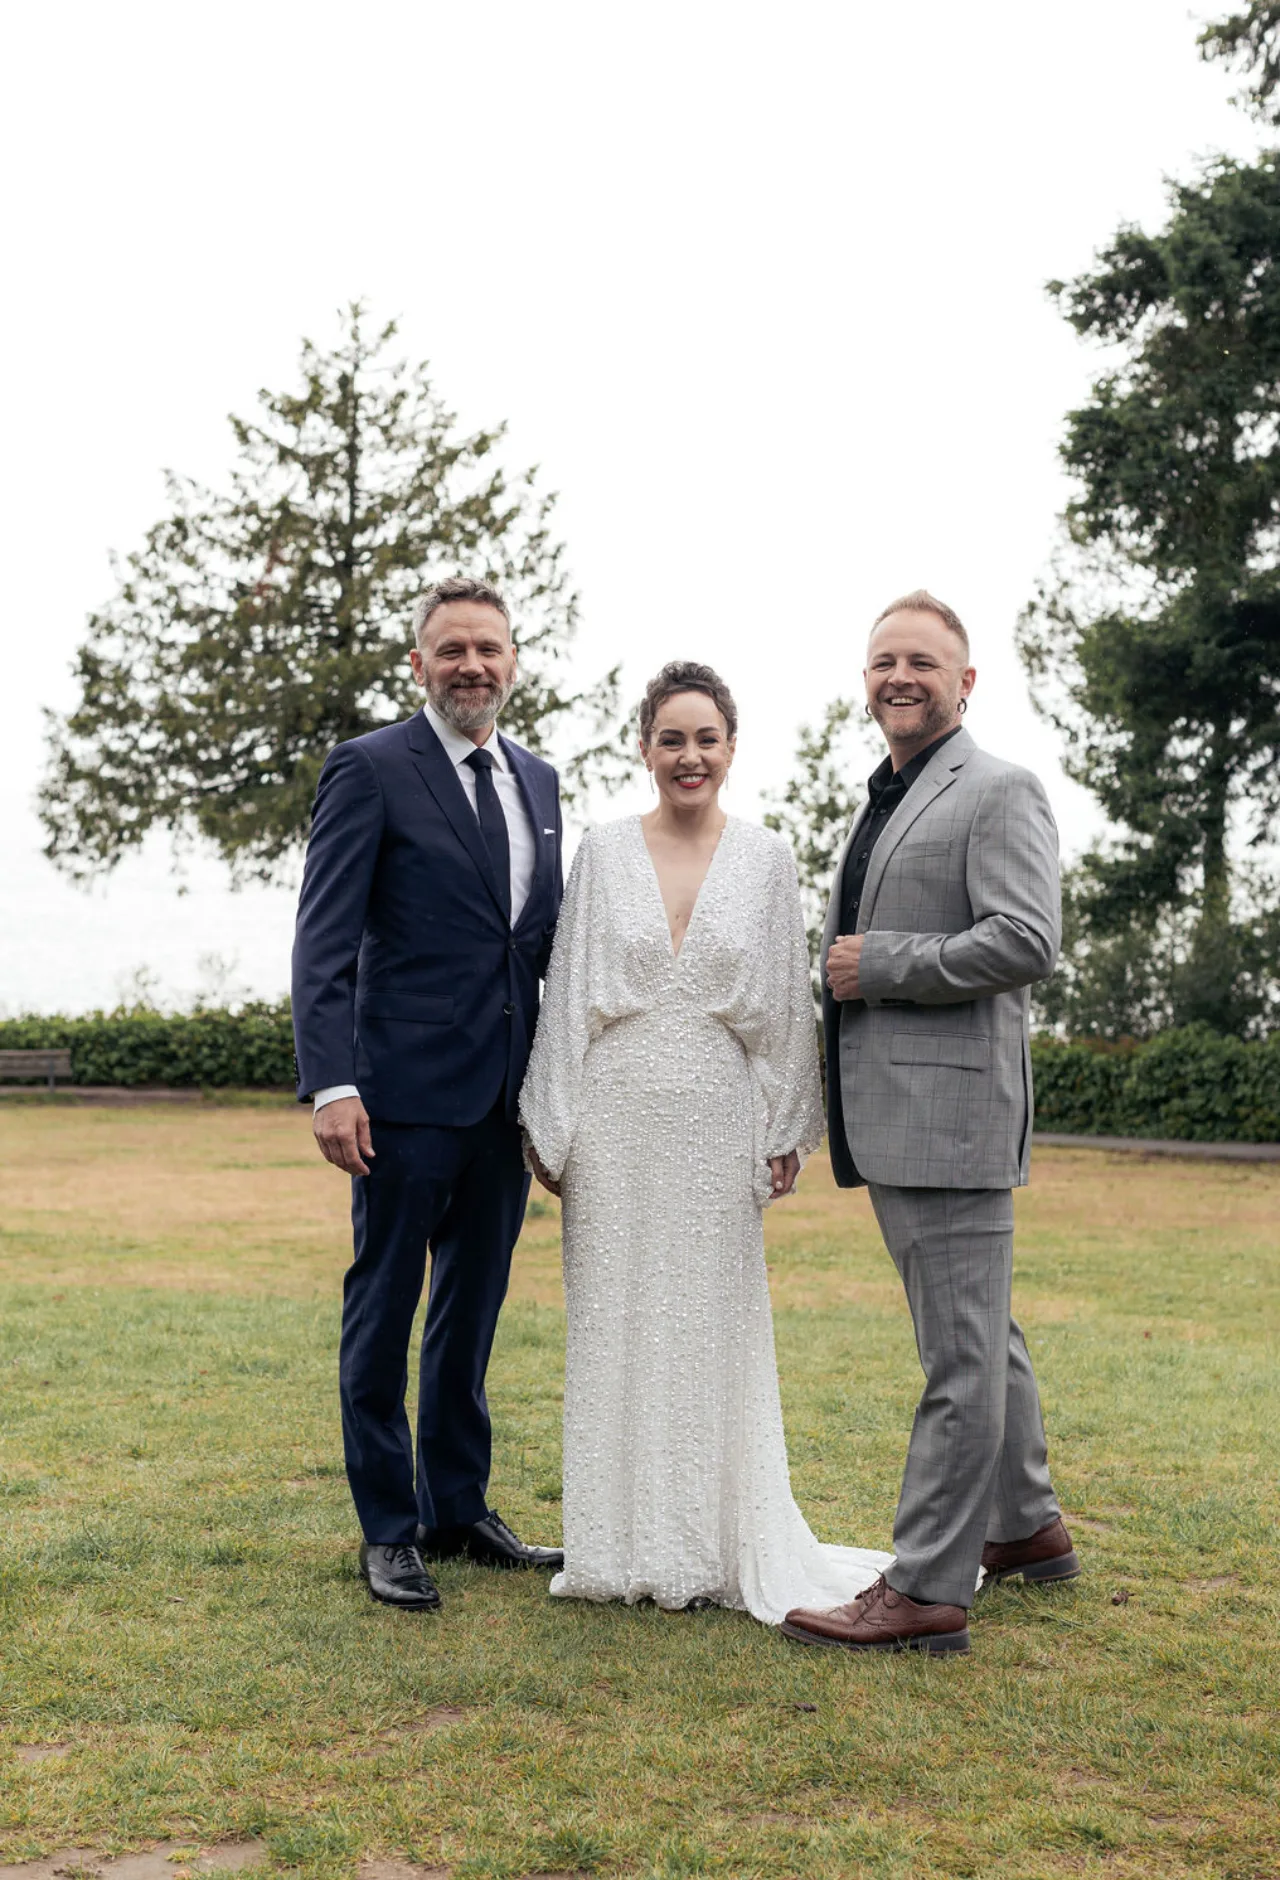 Anna and Scott with Shawn G after their elopement ceremony